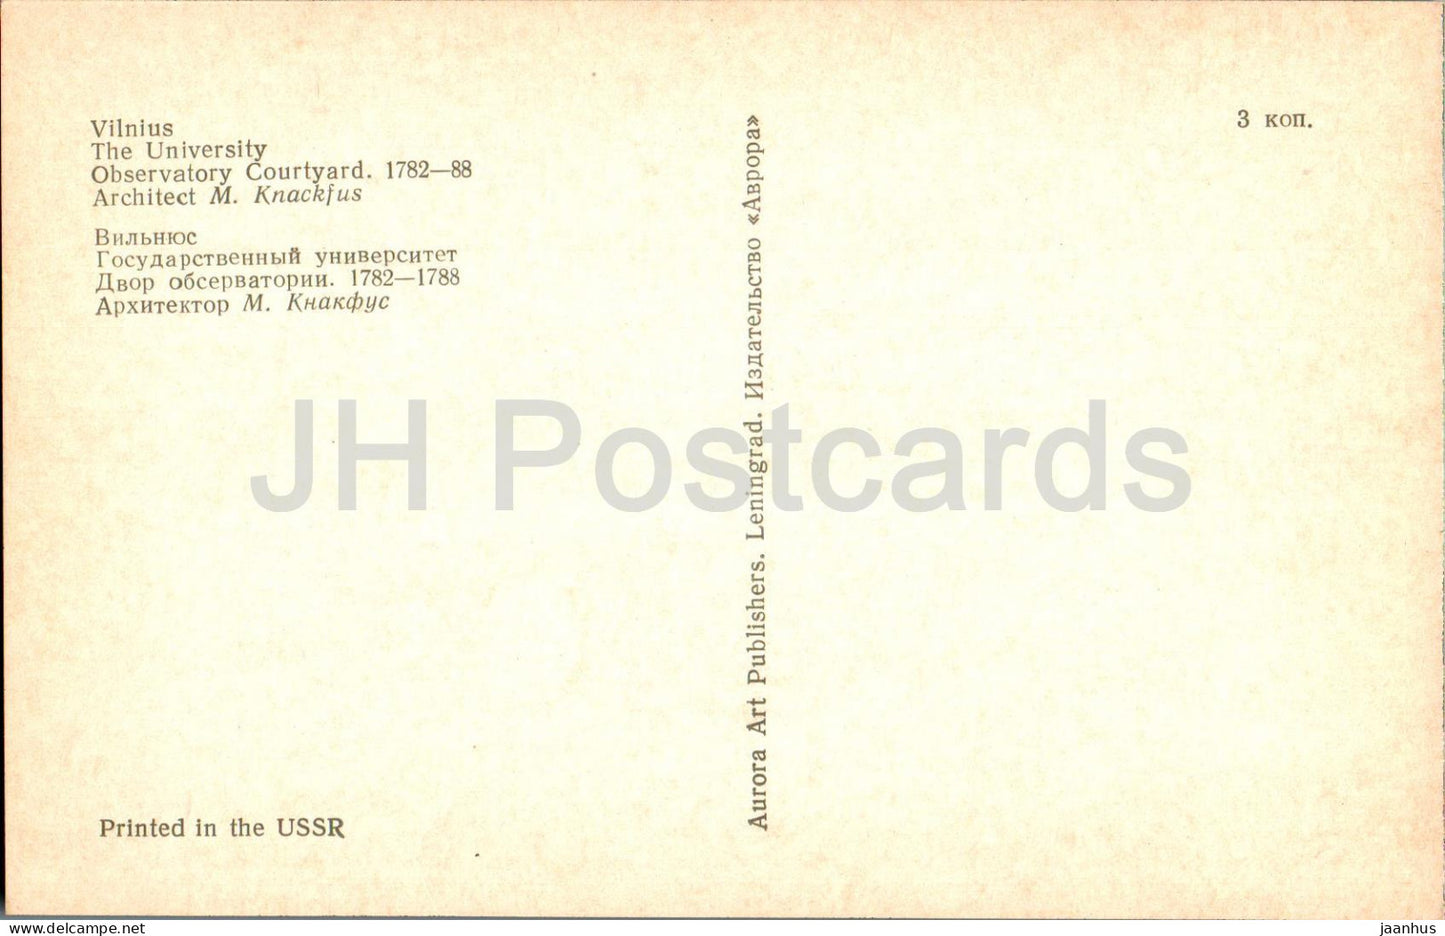 Vilnius - The University - Observatory courtyard - 1973 - Lithuania USSR - unused